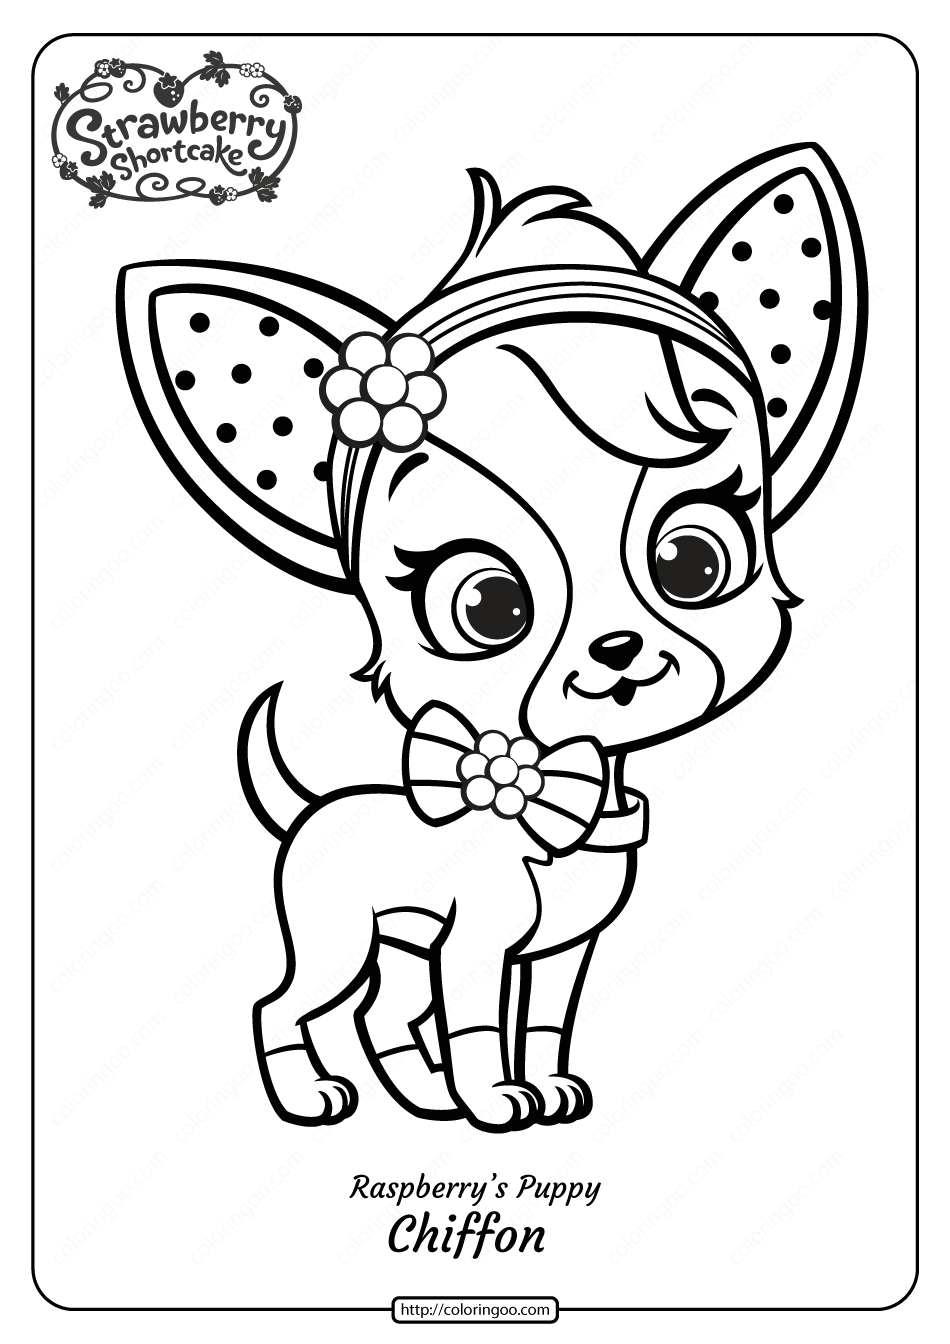 Printable Raspberry's Puppy Chiffon Coloring Page